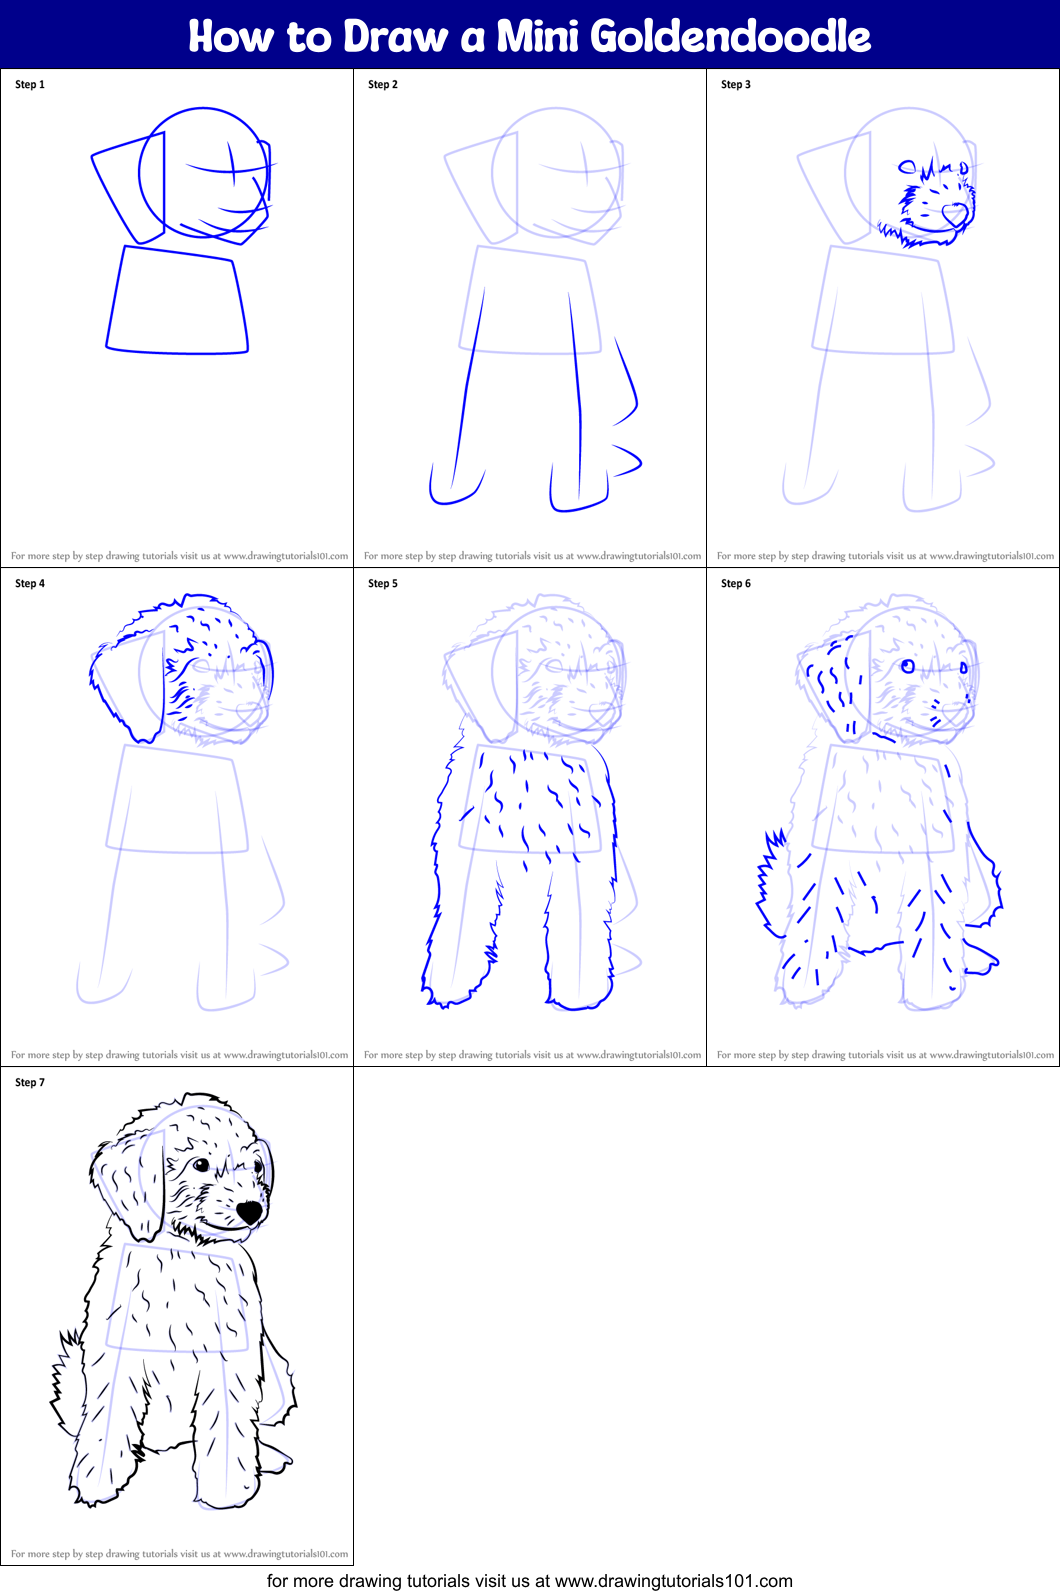 How to Draw a Mini Goldendoodle printable step by step drawing sheet